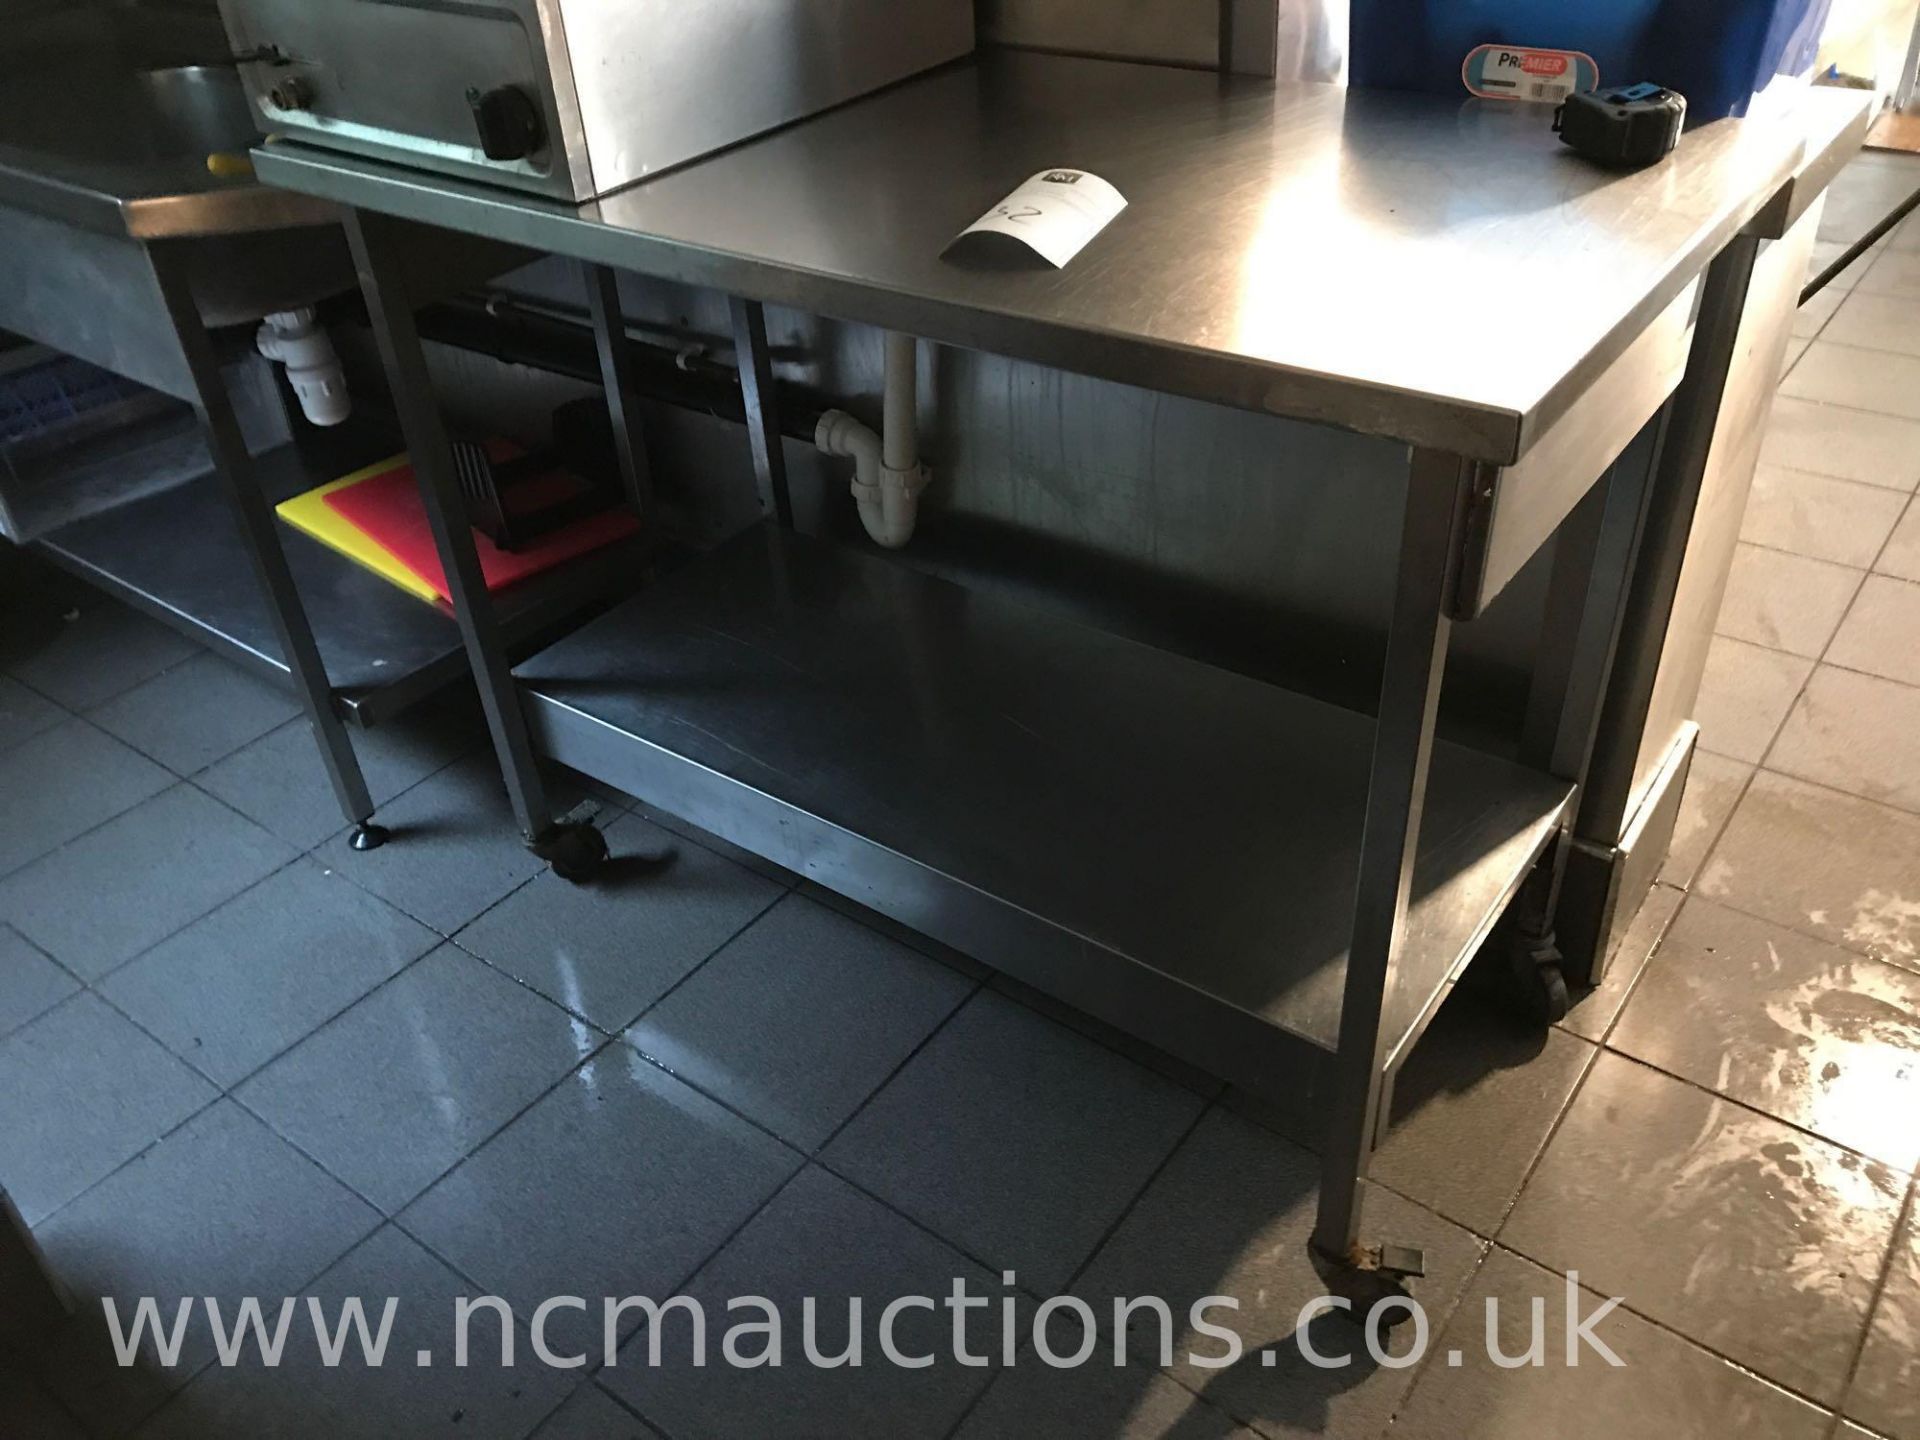 Stainless steel counter and shelf